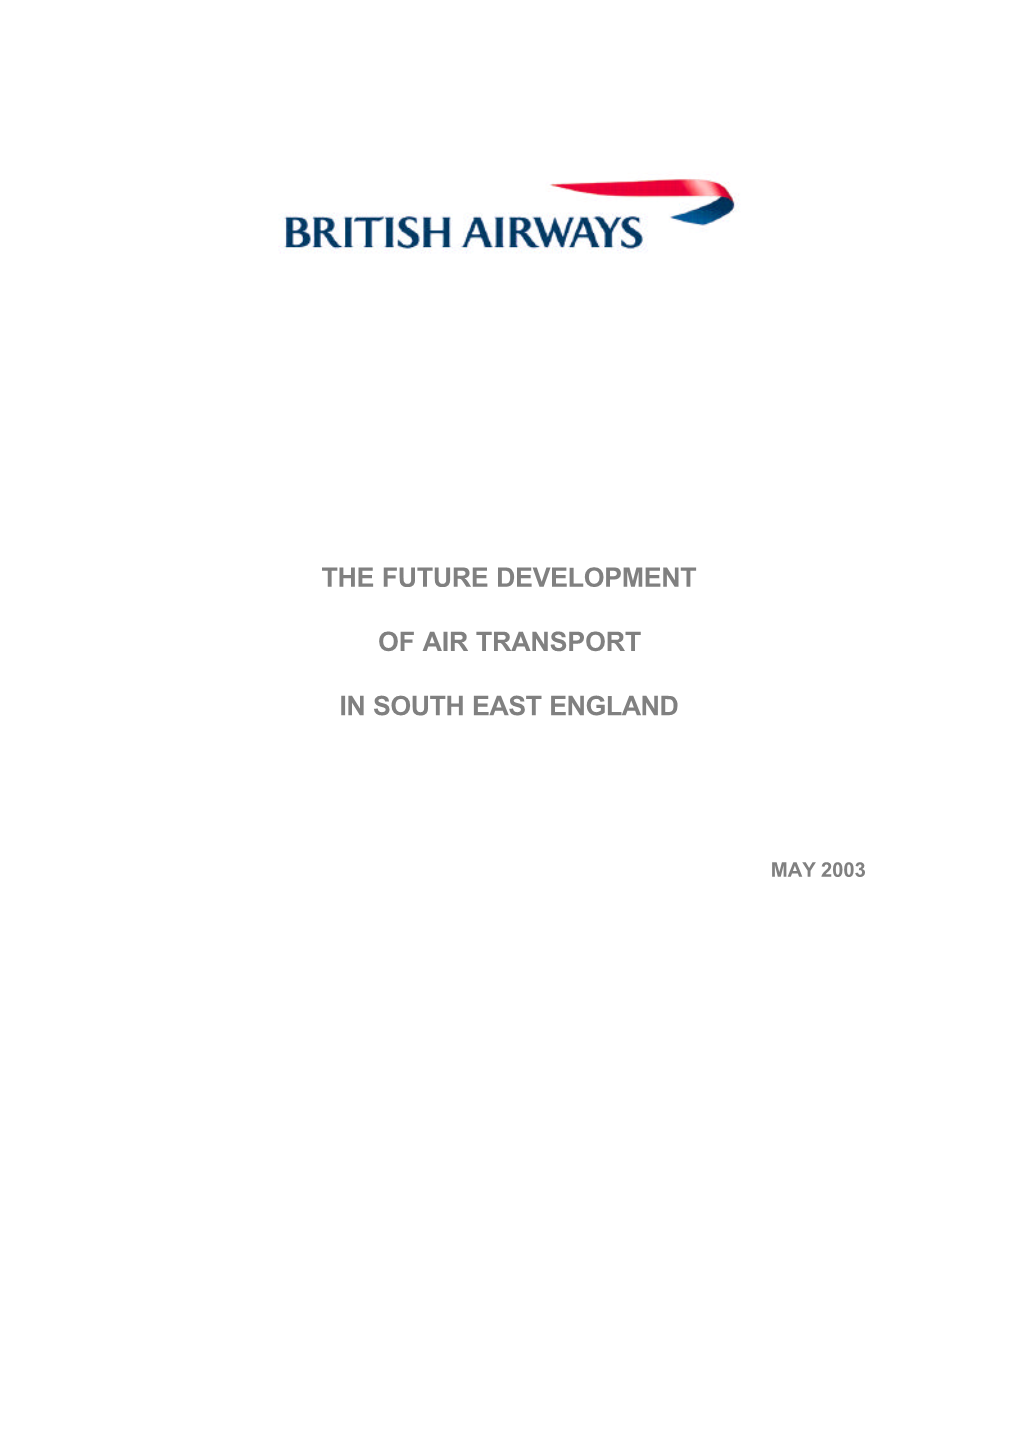 The Future Development of Air Transport in South East